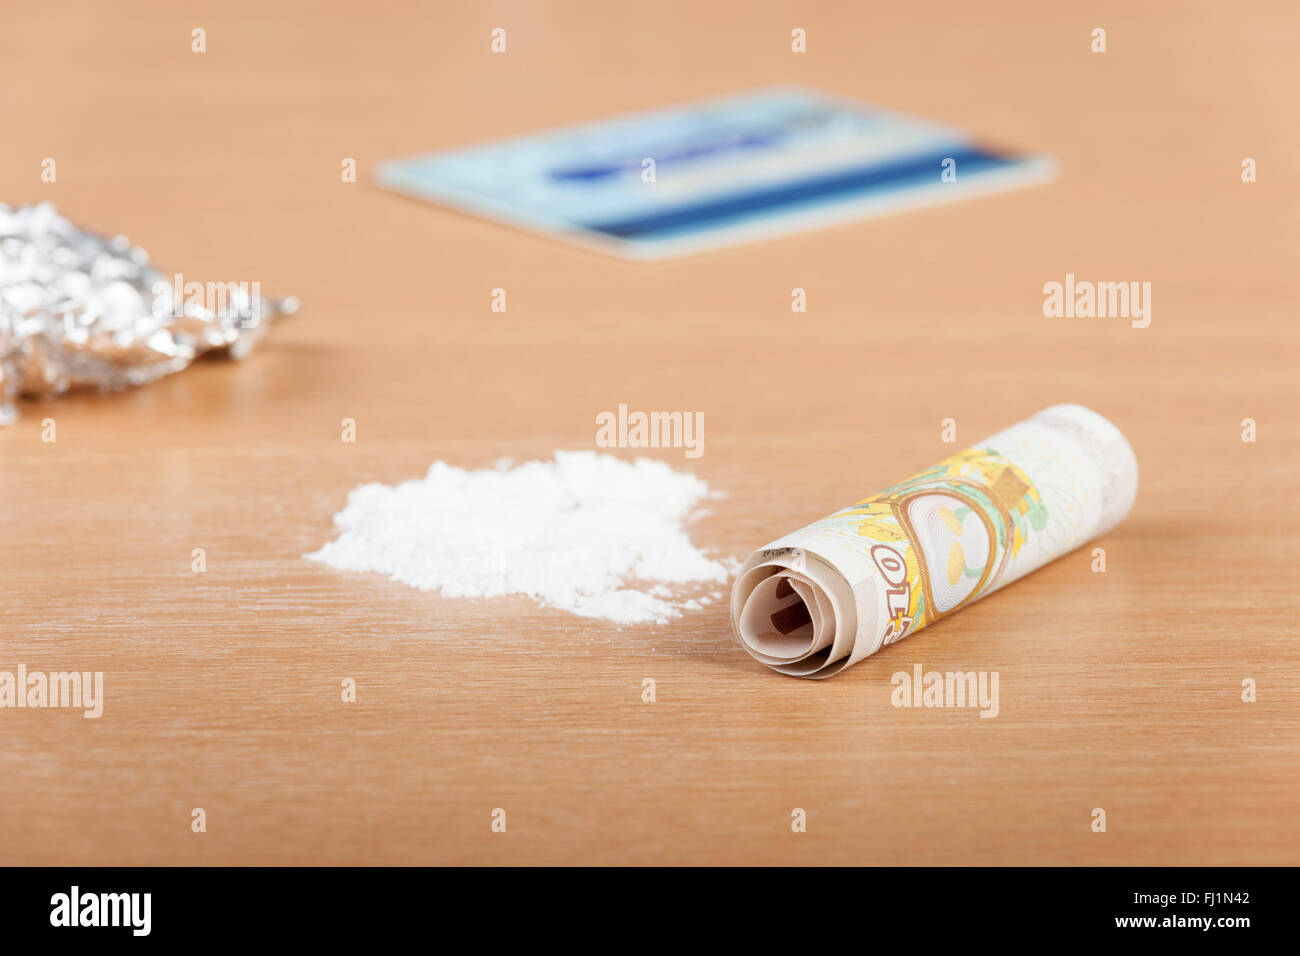 Pile of cocaine on a table ready to be lined up with a rolled up bank note and a credit card Stock Photo